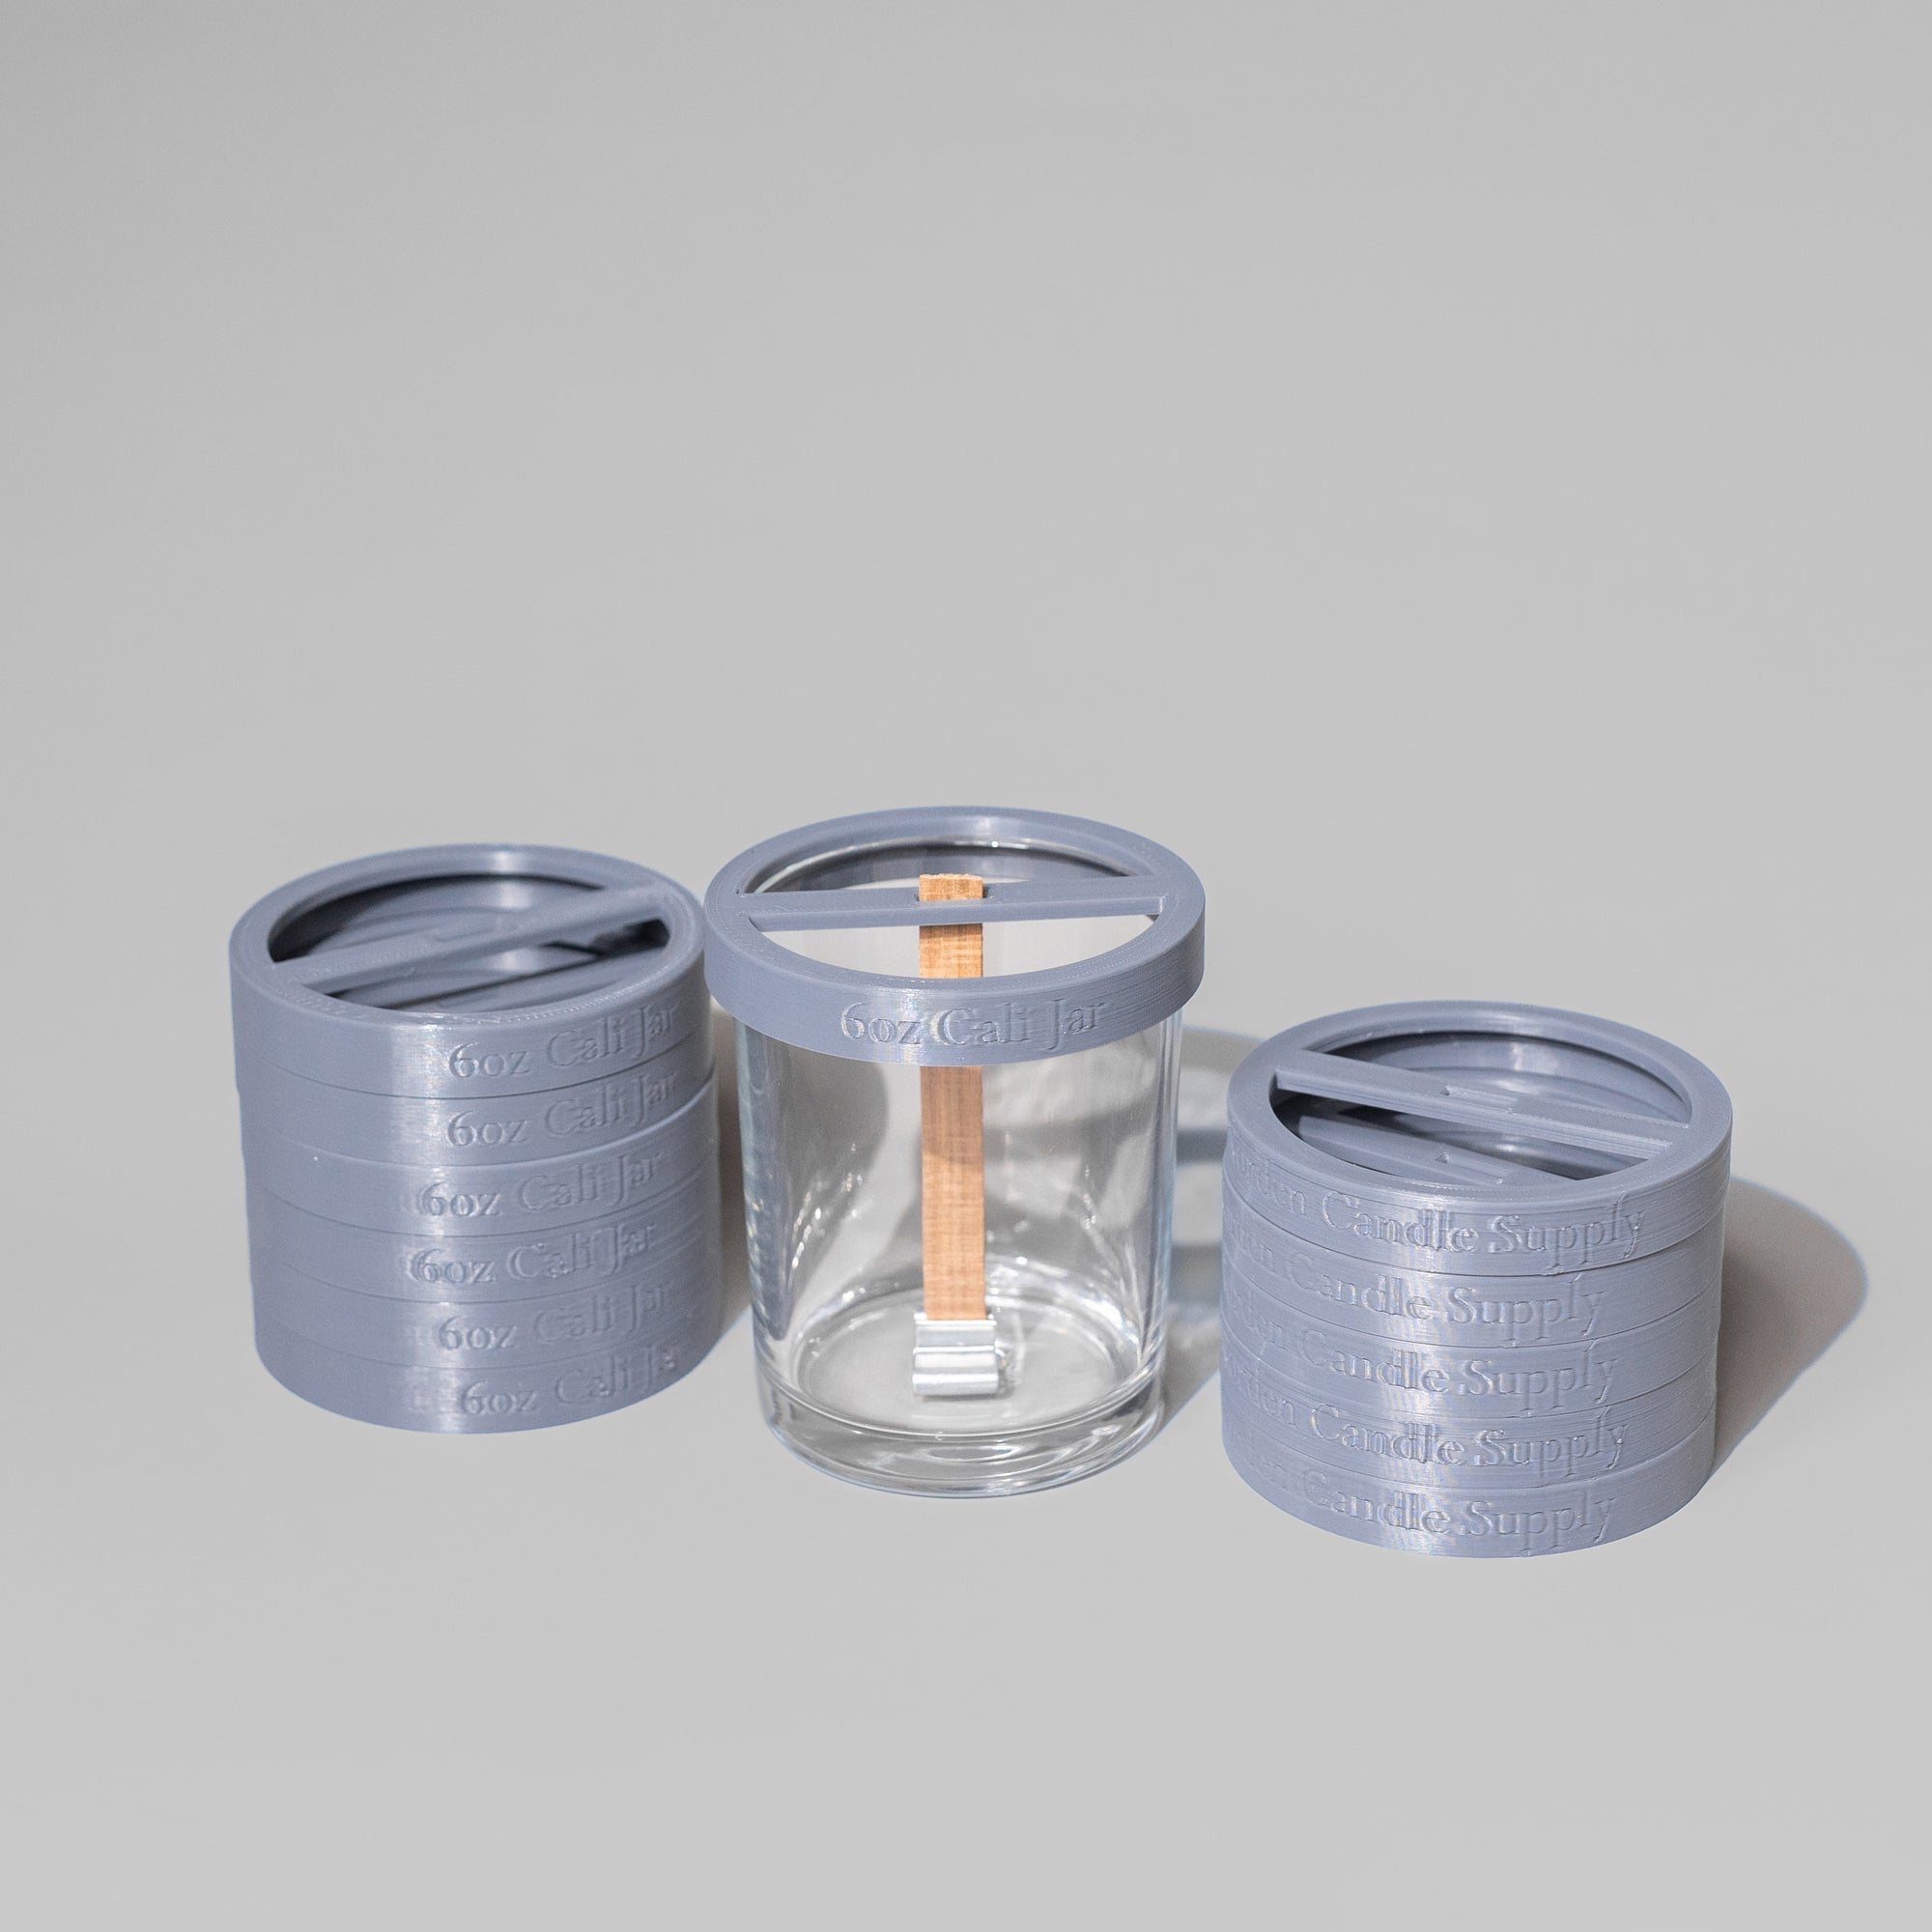 AMAZING 3-D PRINTED WICK HOLDERS: Nice compact wick holders from